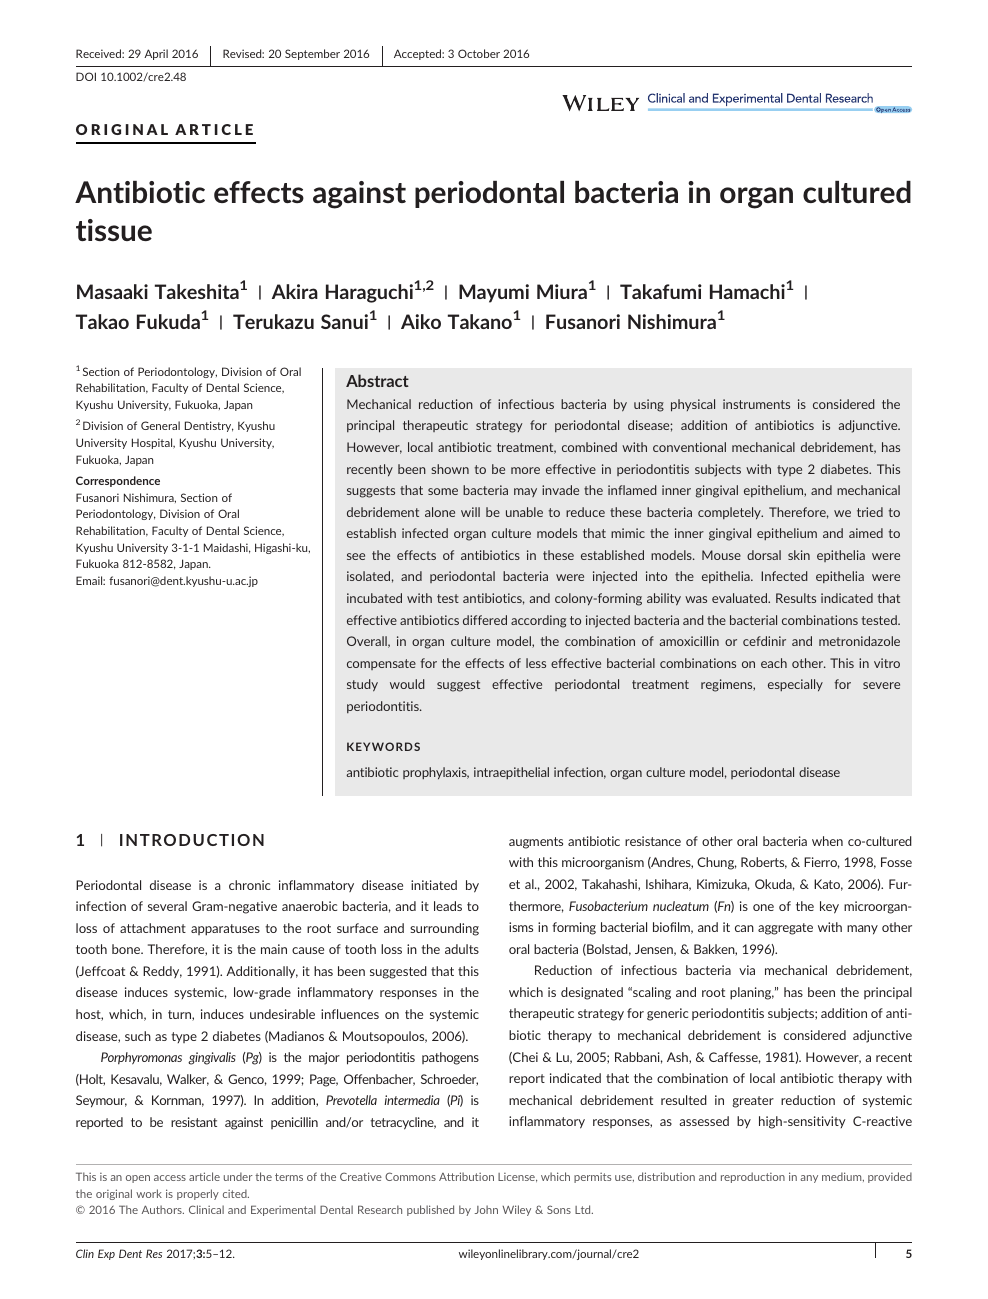 Antibiotic Effects Against Periodontal Bacteria In Organ Cultured Tissue Topic Of Research Paper In Clinical Medicine Download Scholarly Article Pdf And Read For Free On Cyberleninka Open Science Hub